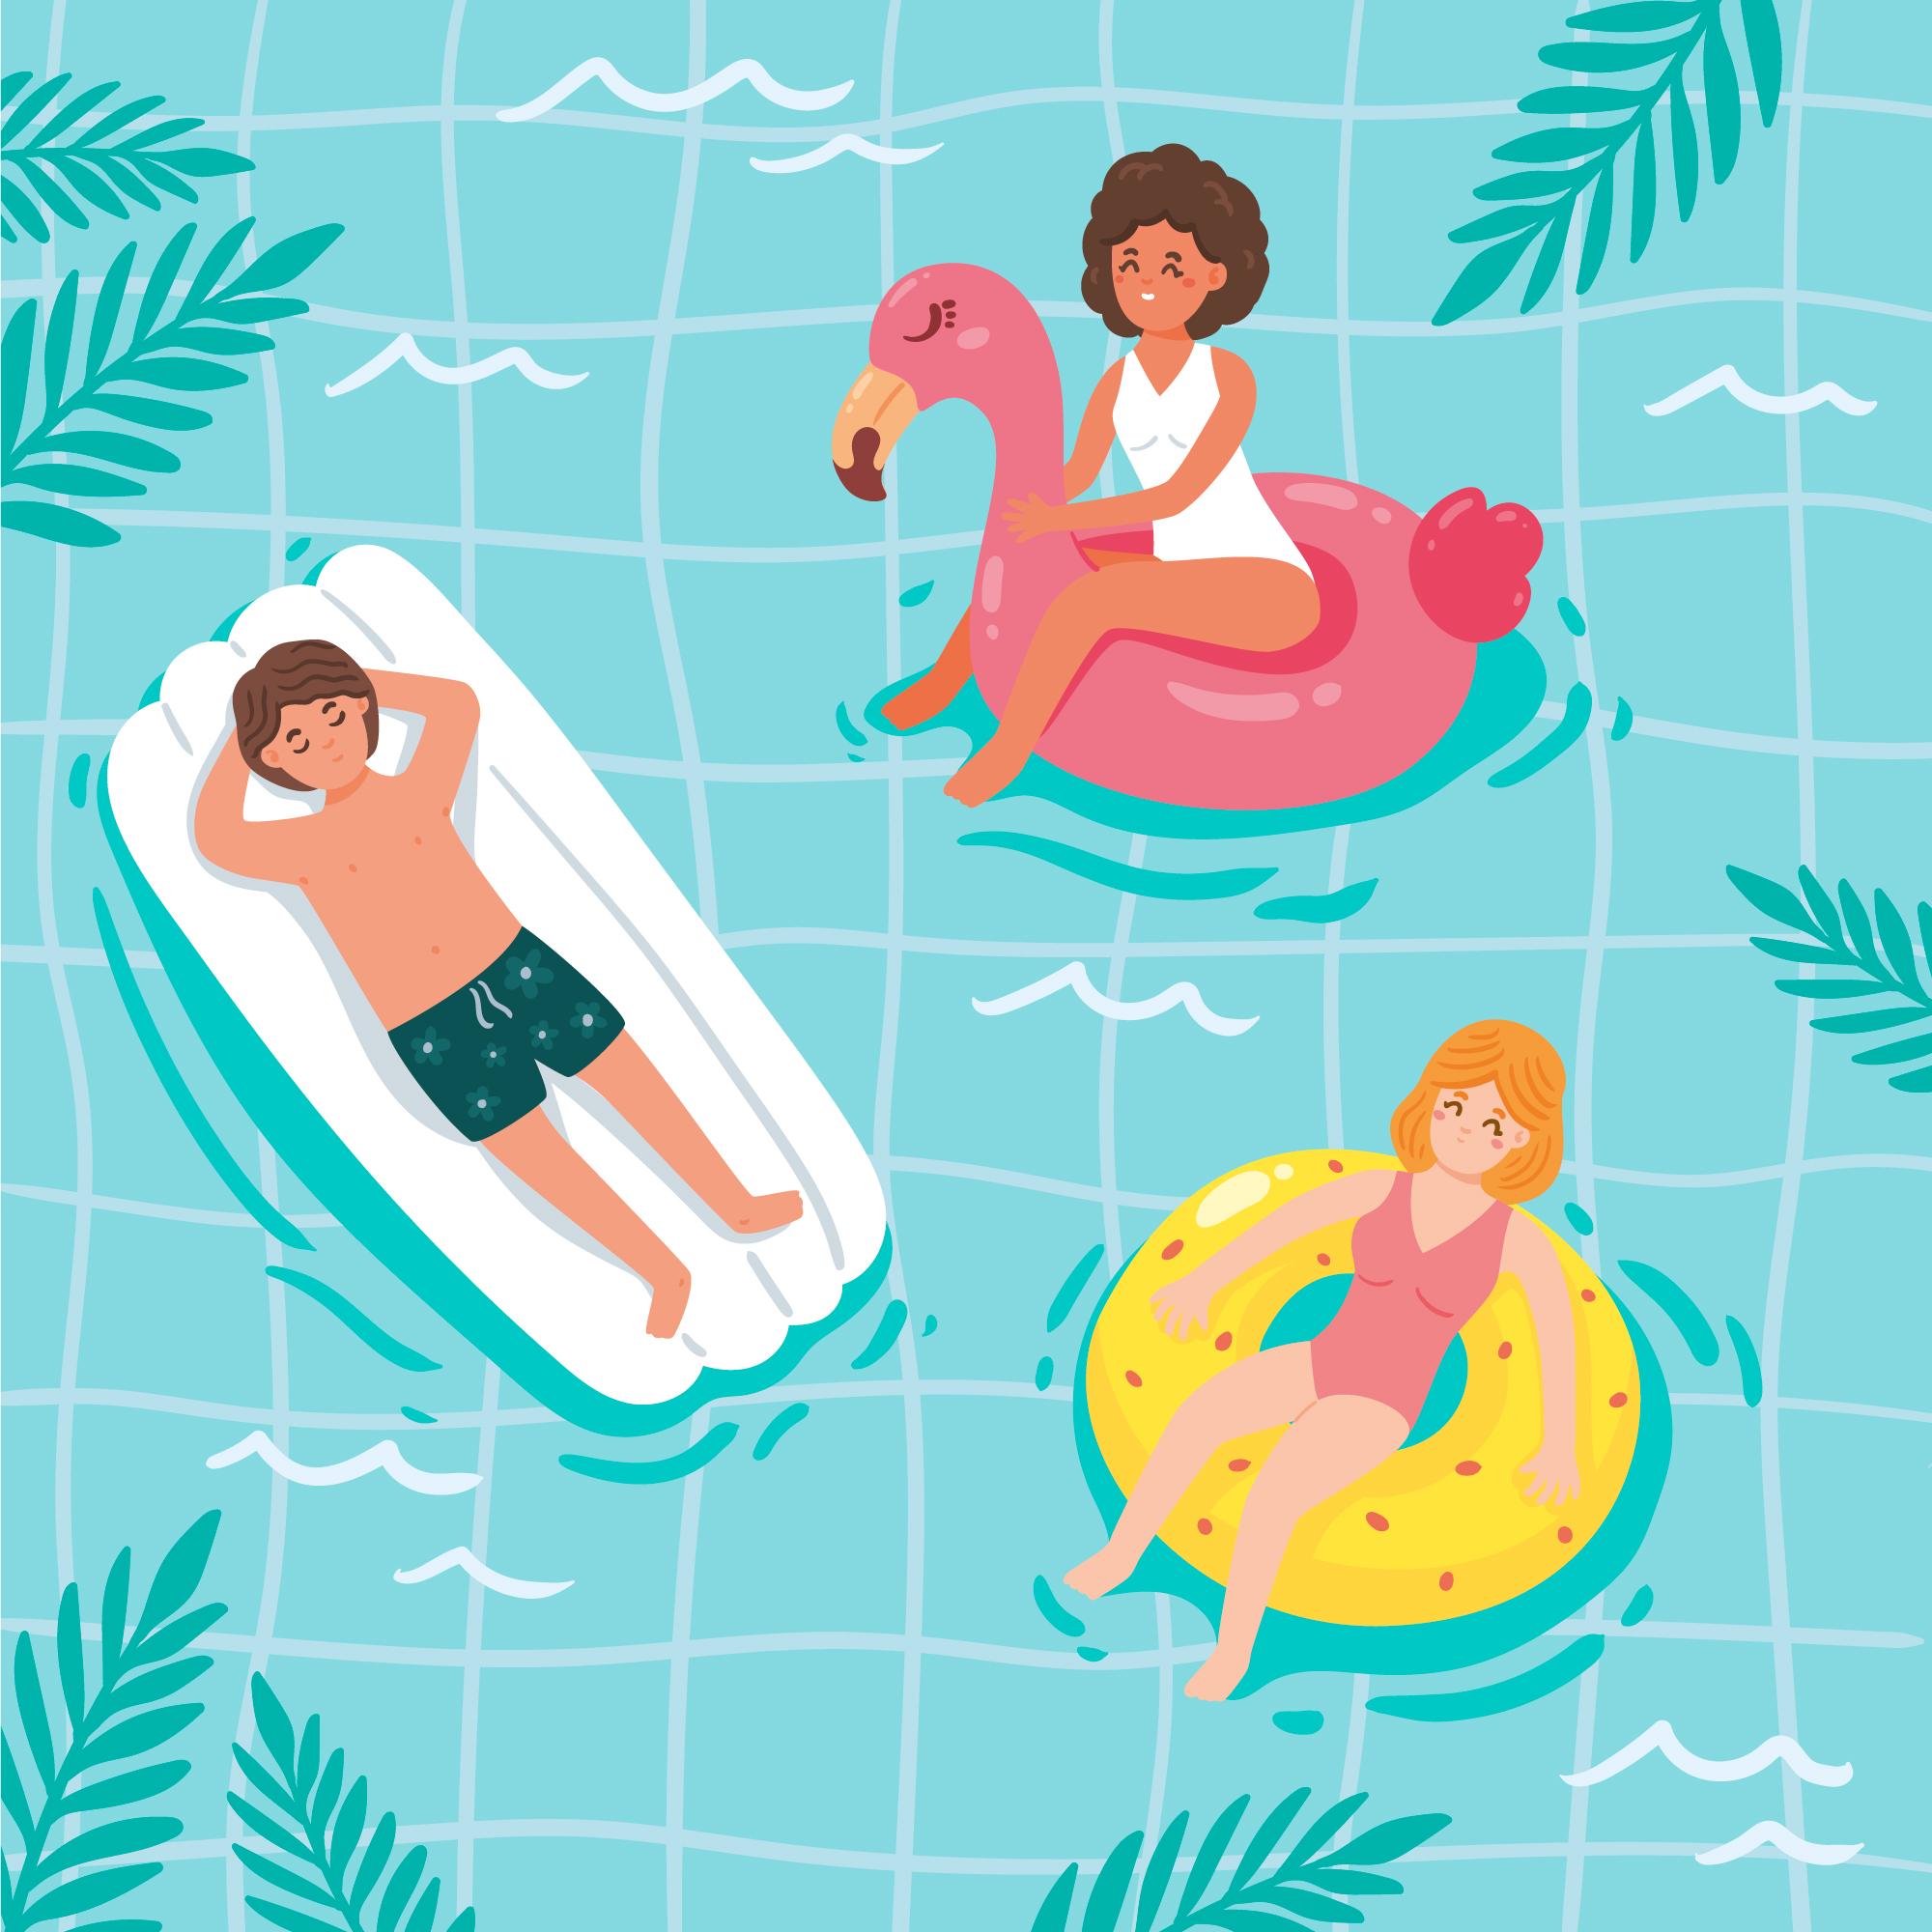 A man and two women float in a pool using inflatables